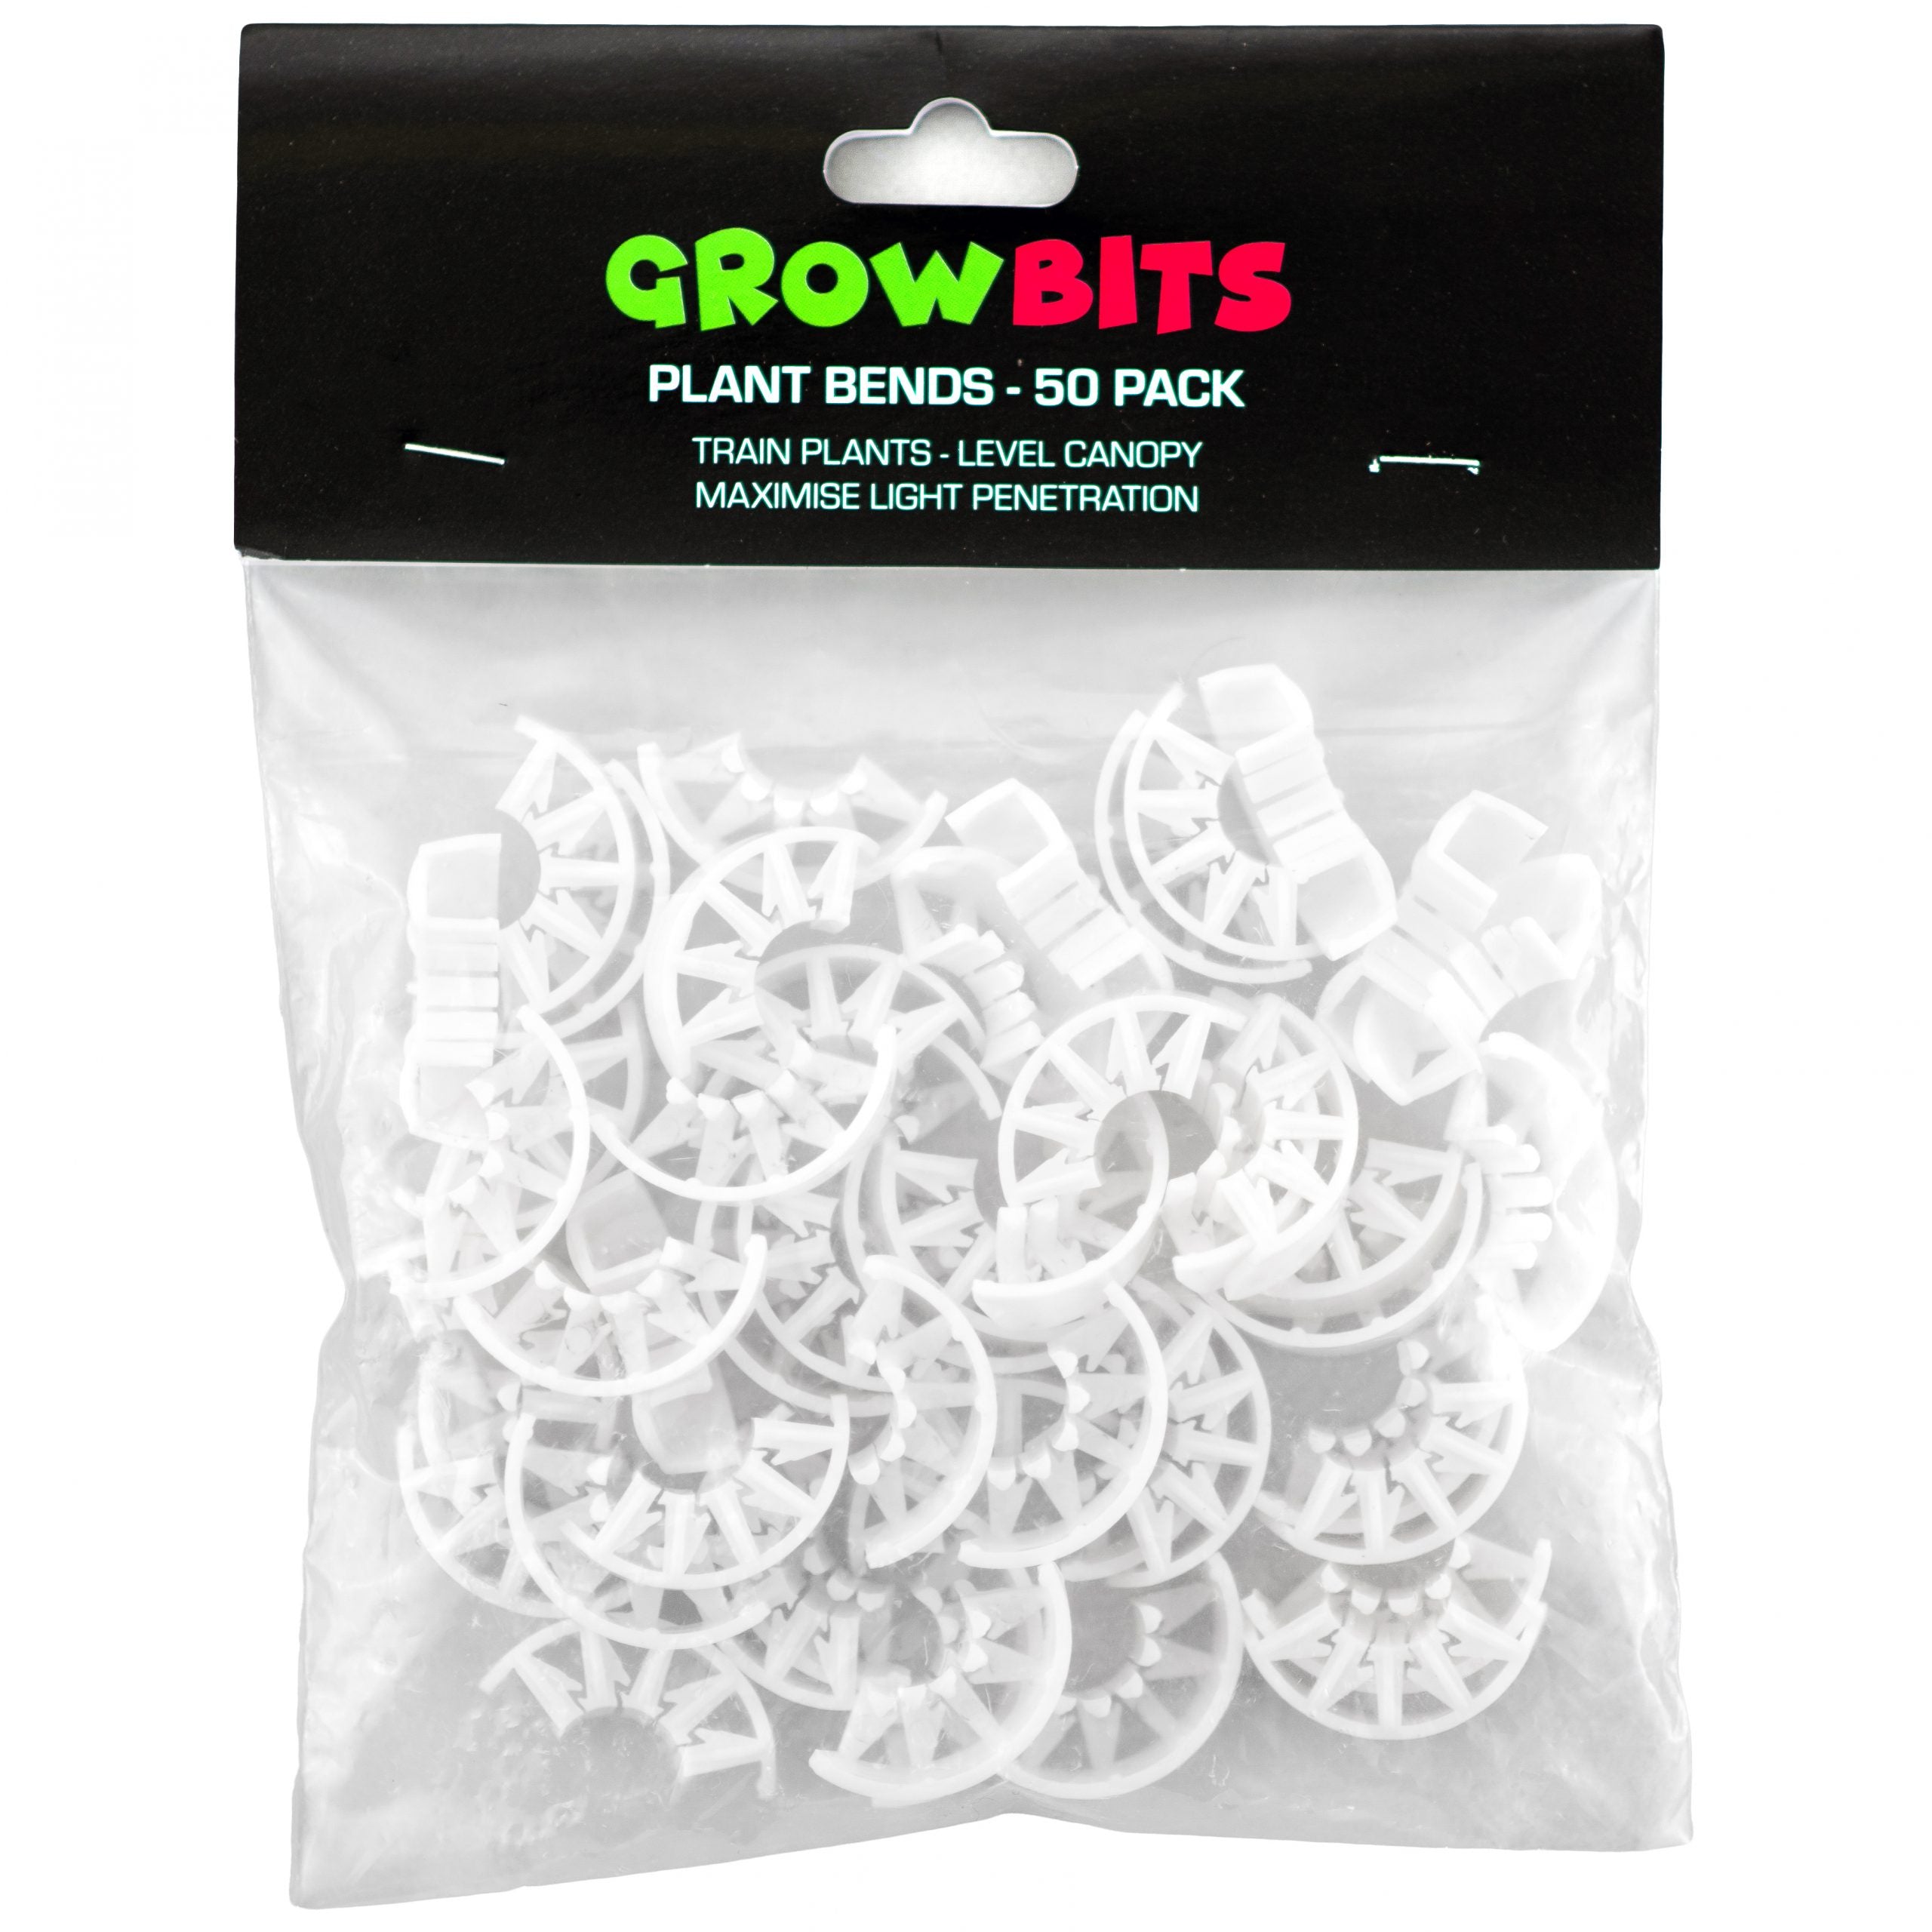 Grow Bits Plant Bends 50 Pack